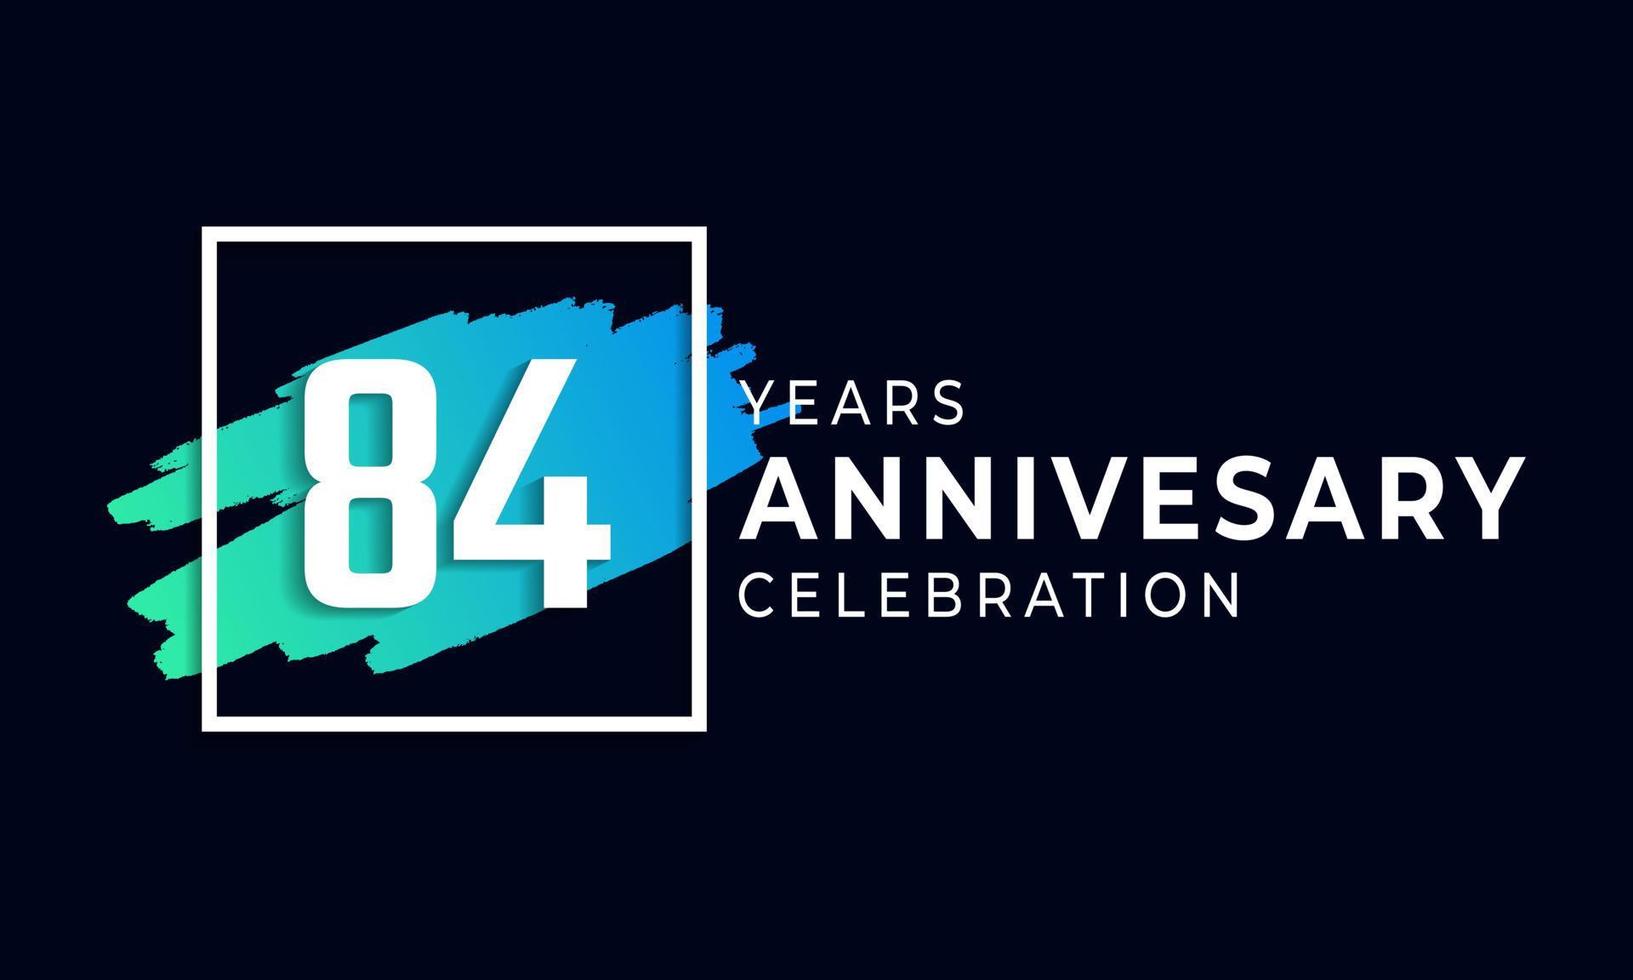 84 Year Anniversary Celebration with Blue Brush and Square Symbol. Happy Anniversary Greeting Celebrates Event Isolated on Black Background vector